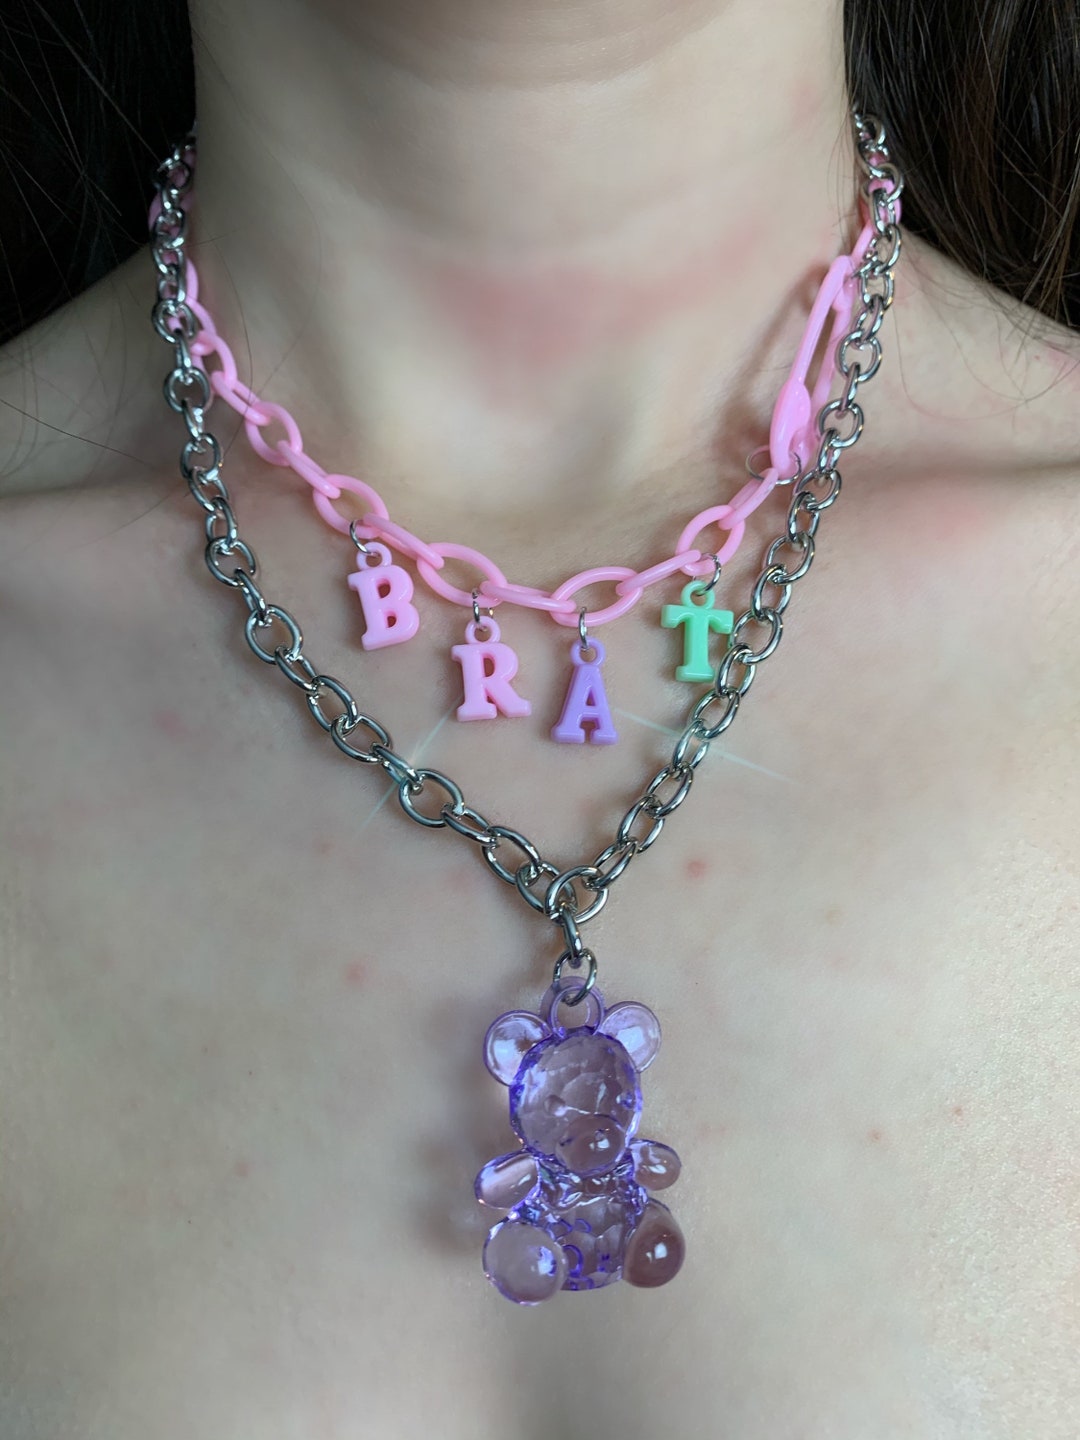 Y2k Brat and Gummy Bear Chain Necklaces - Etsy